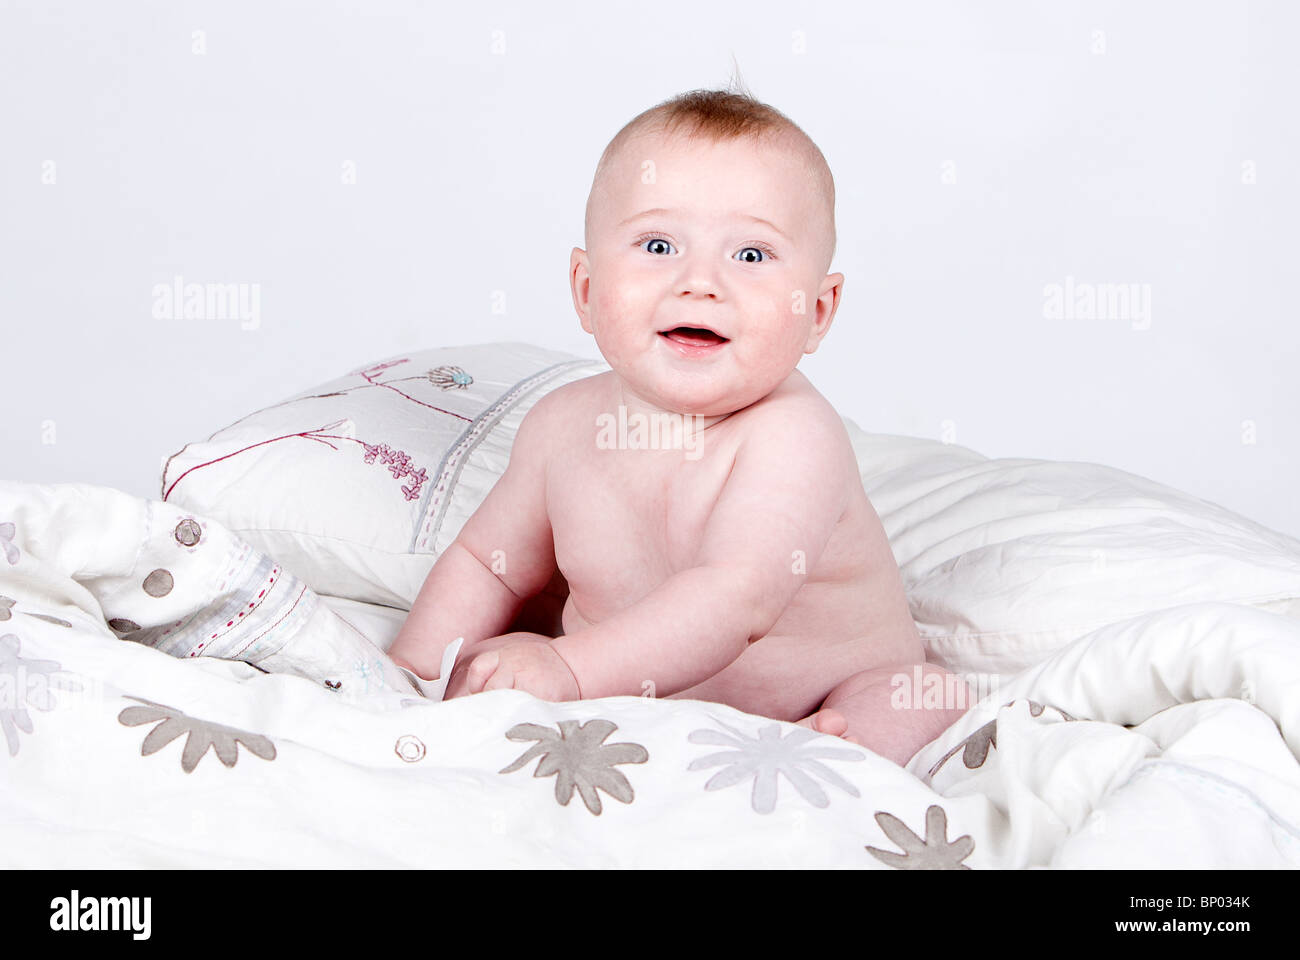 Shot of a Very Cute Baby Boy on Duvet against Grey Background ...